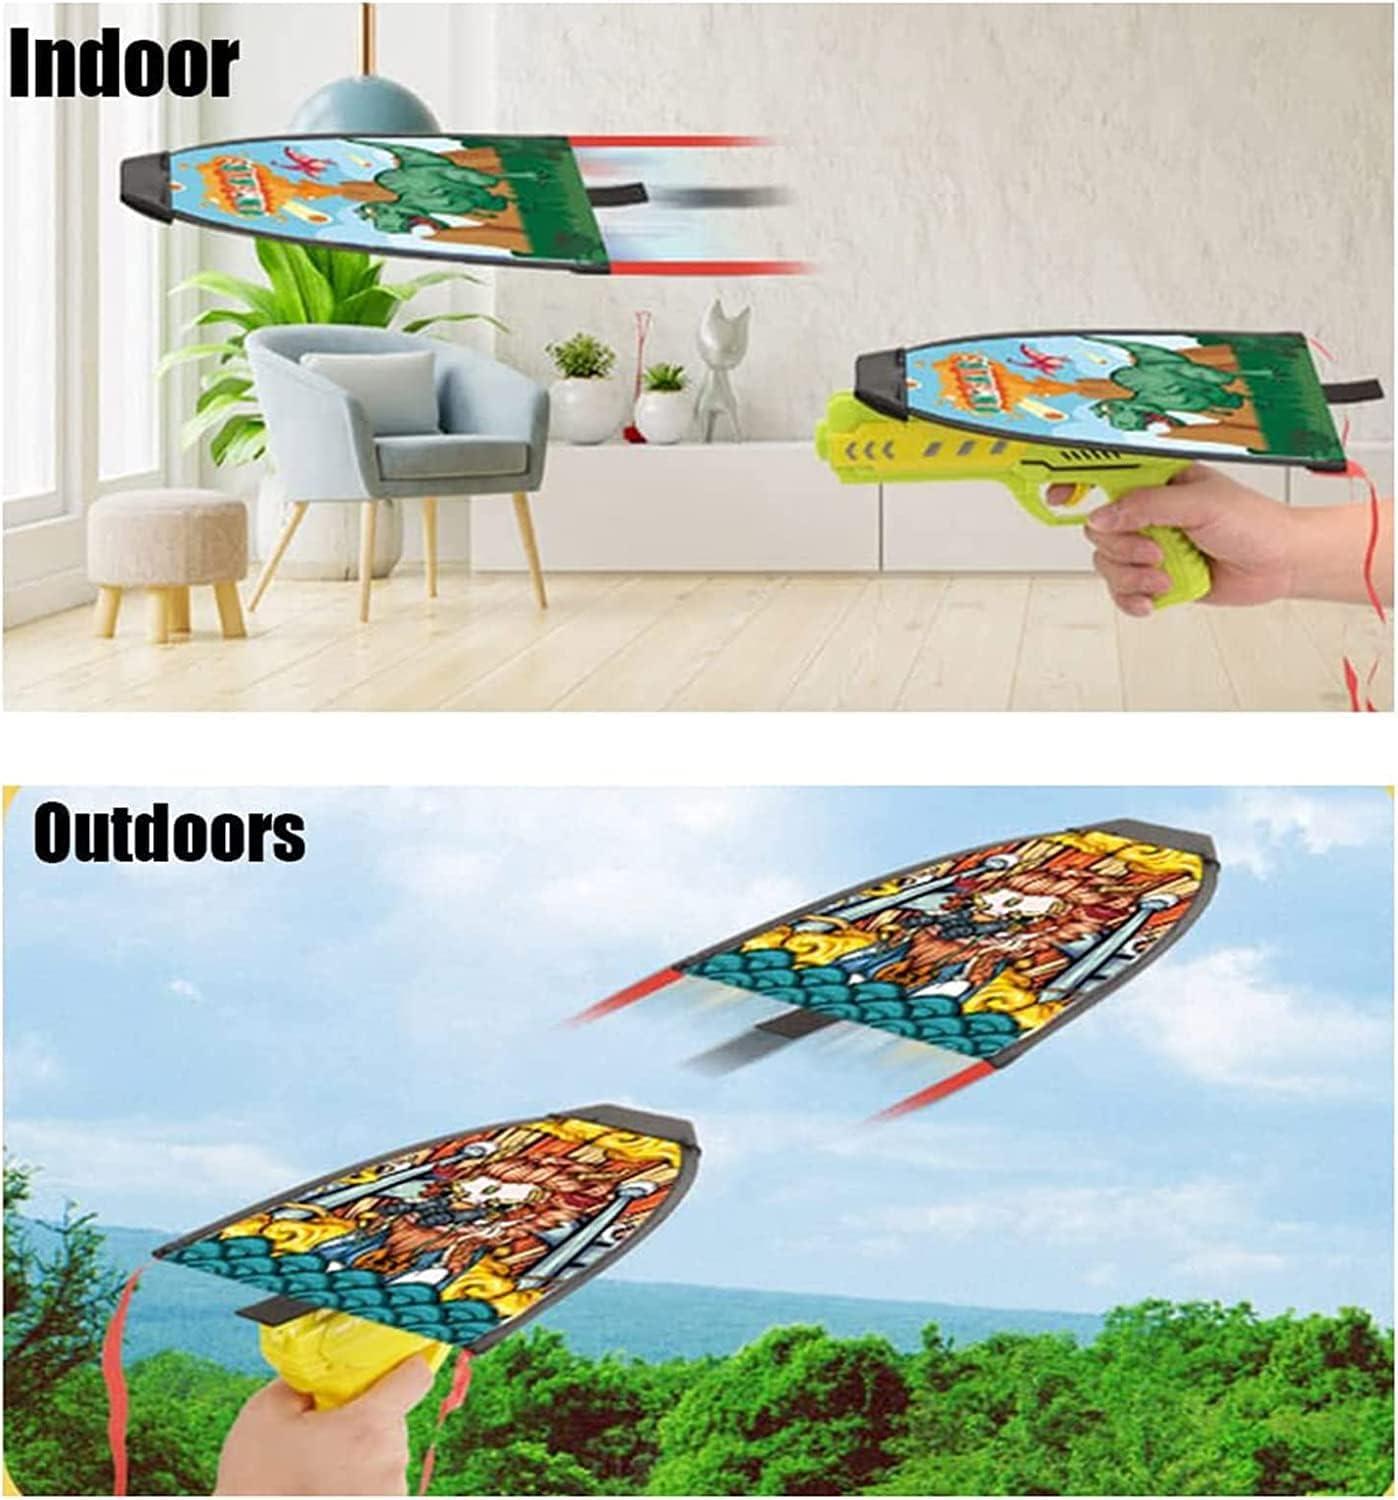 3PCS Kite with Launcher Toy, Kite Launcher with 3 Kites Beach Toy